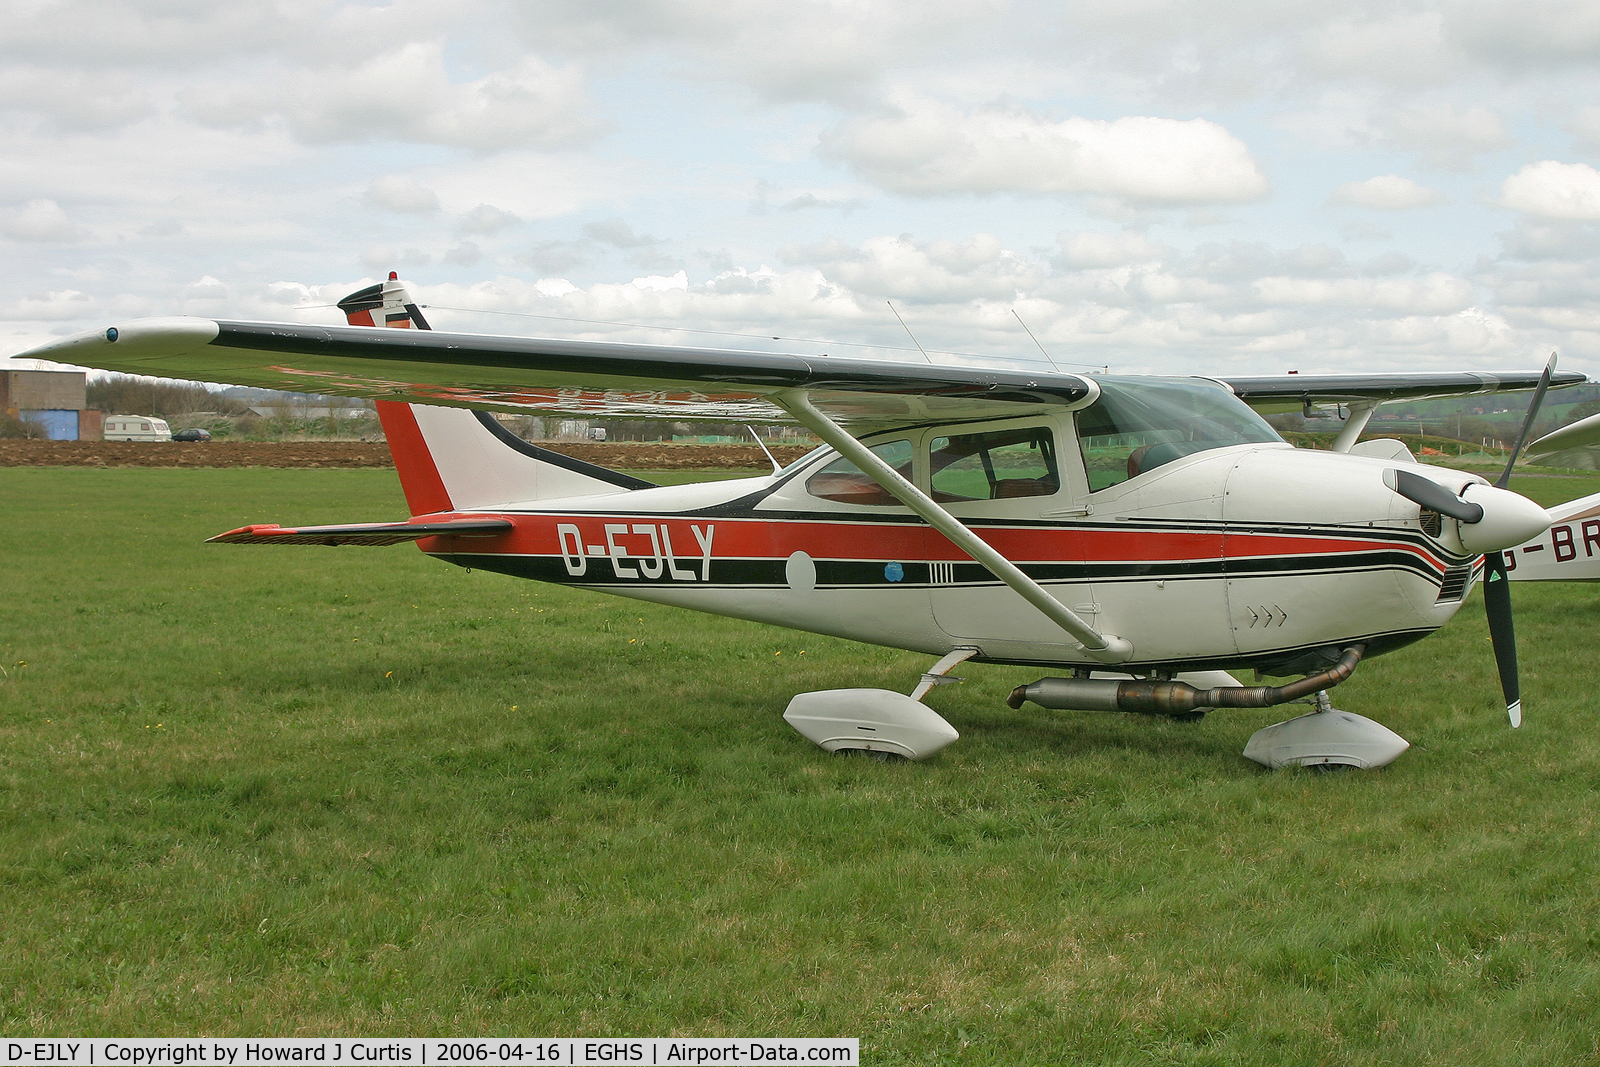 D-EJLY, Cessna 182K Skylane C/N 182-57879, Privately owned, at the PFA fly-in here.